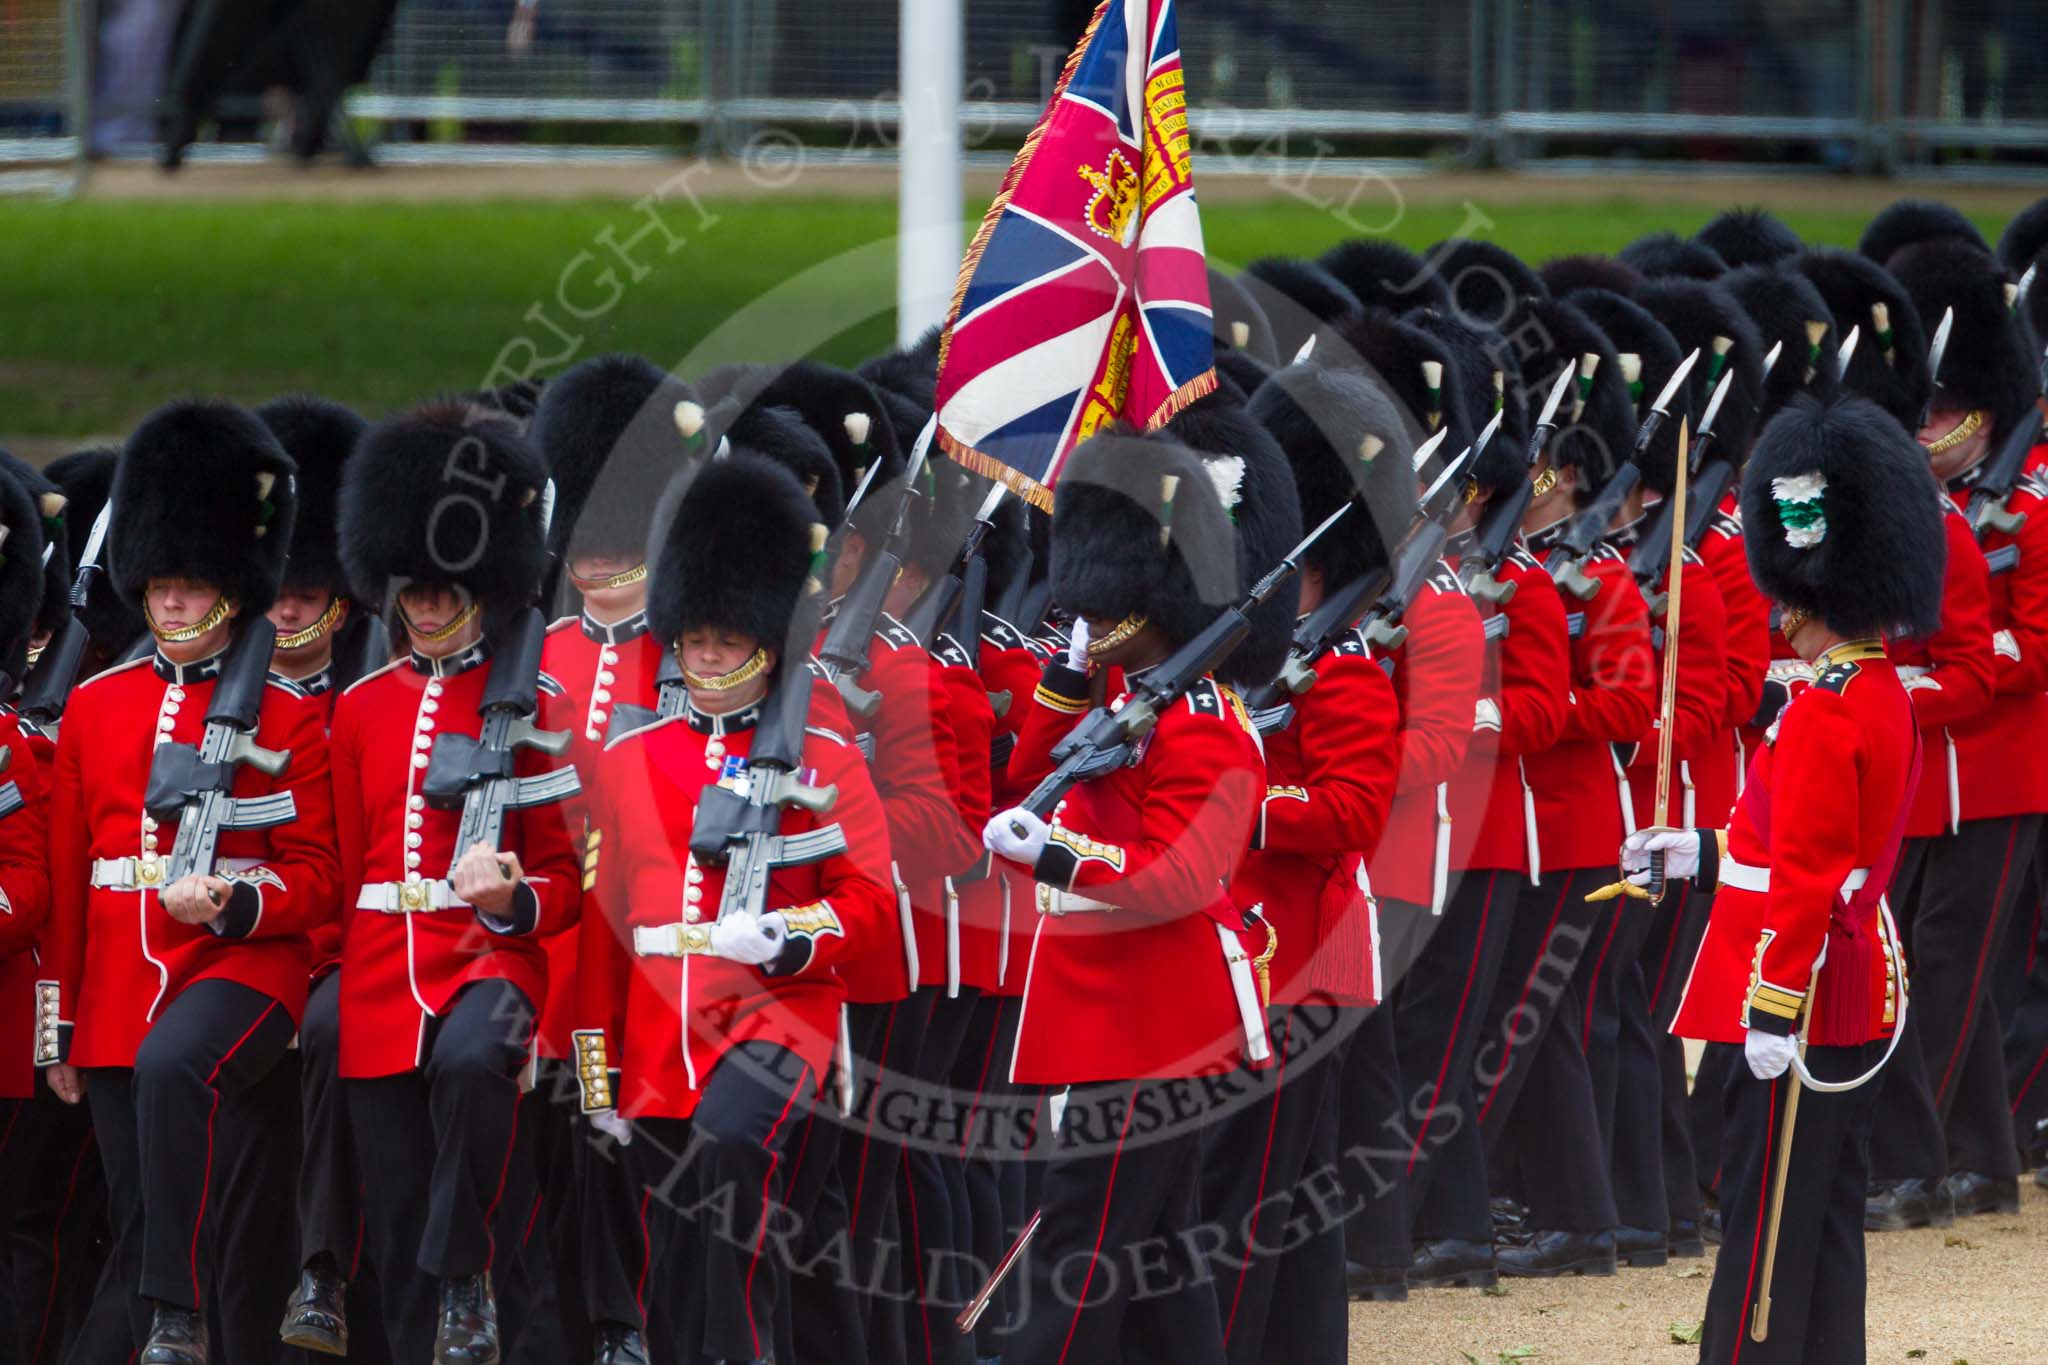 The Colonel's Review 2015.
Horse Guards Parade, Westminster,
London,

United Kingdom,
on 06 June 2015 at 11:30, image #348